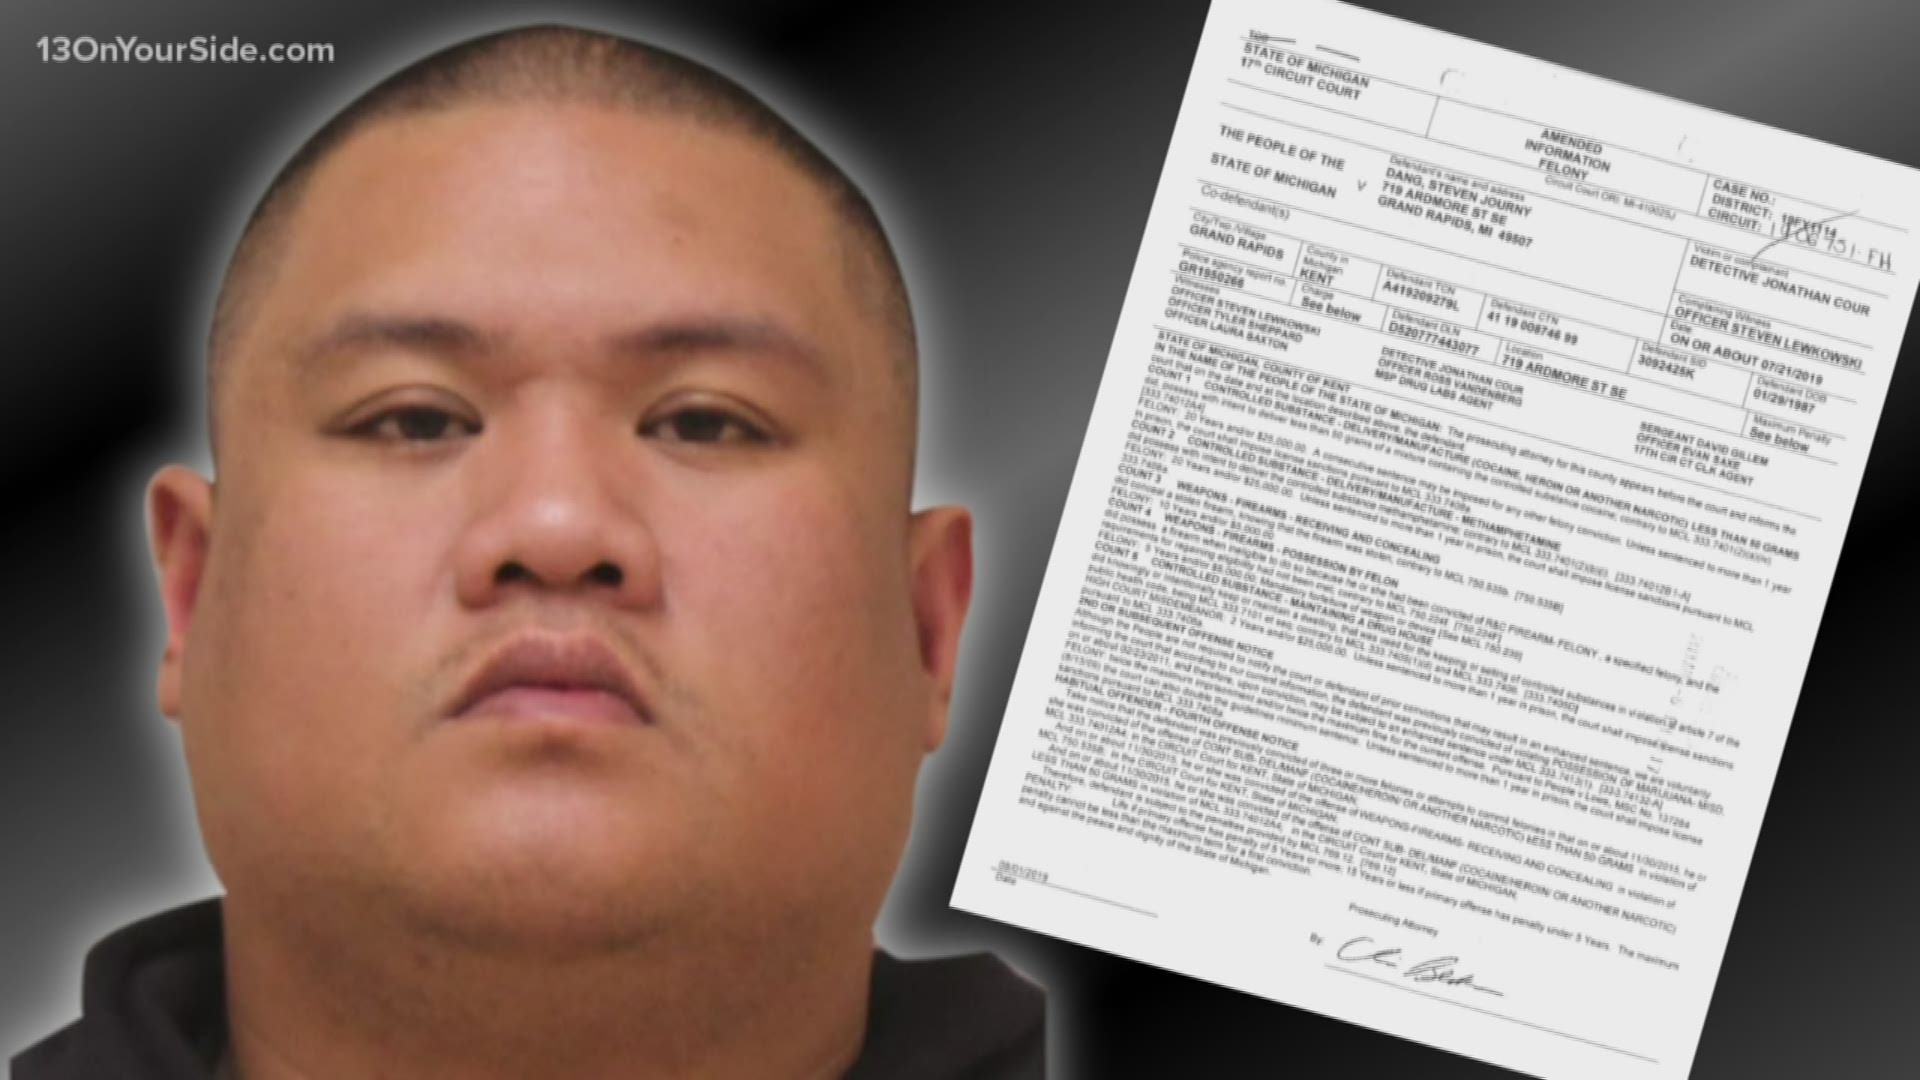 Steven J. Dang is facing federal charges after police say they found drugs and stolen handguns at his Grand Rapids home while investigating a July 21 overdose death.